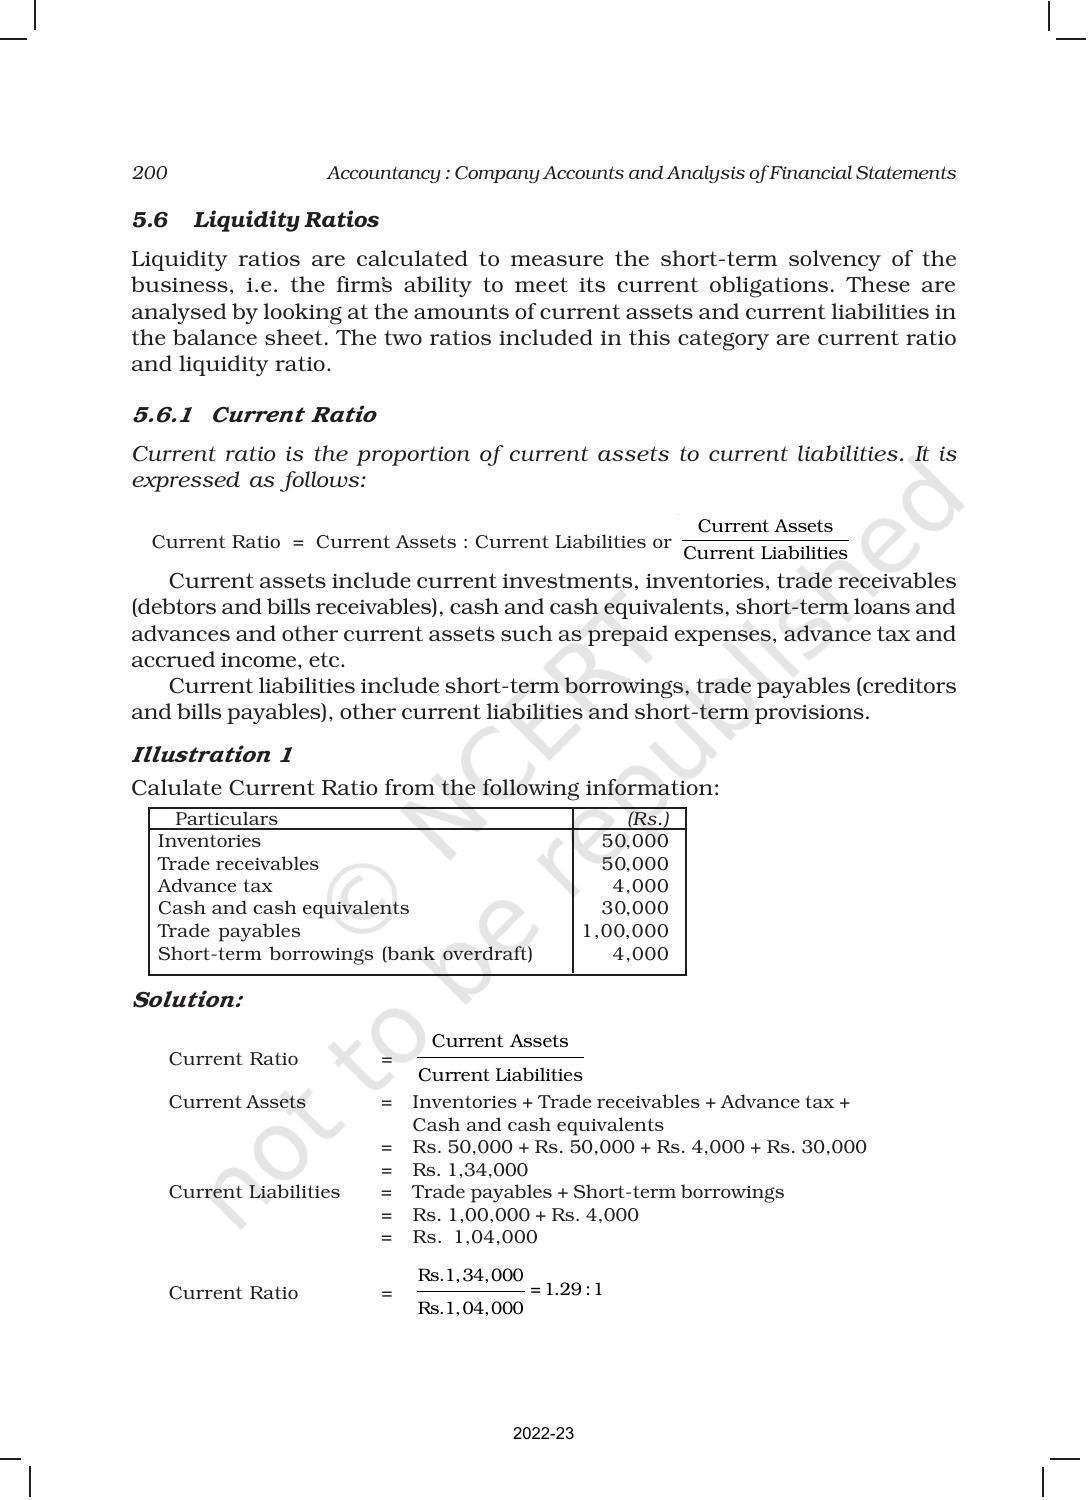 NCERT Book for Class 12 Accountancy Part II Chapter 5 Accounting Ratios - Page 7